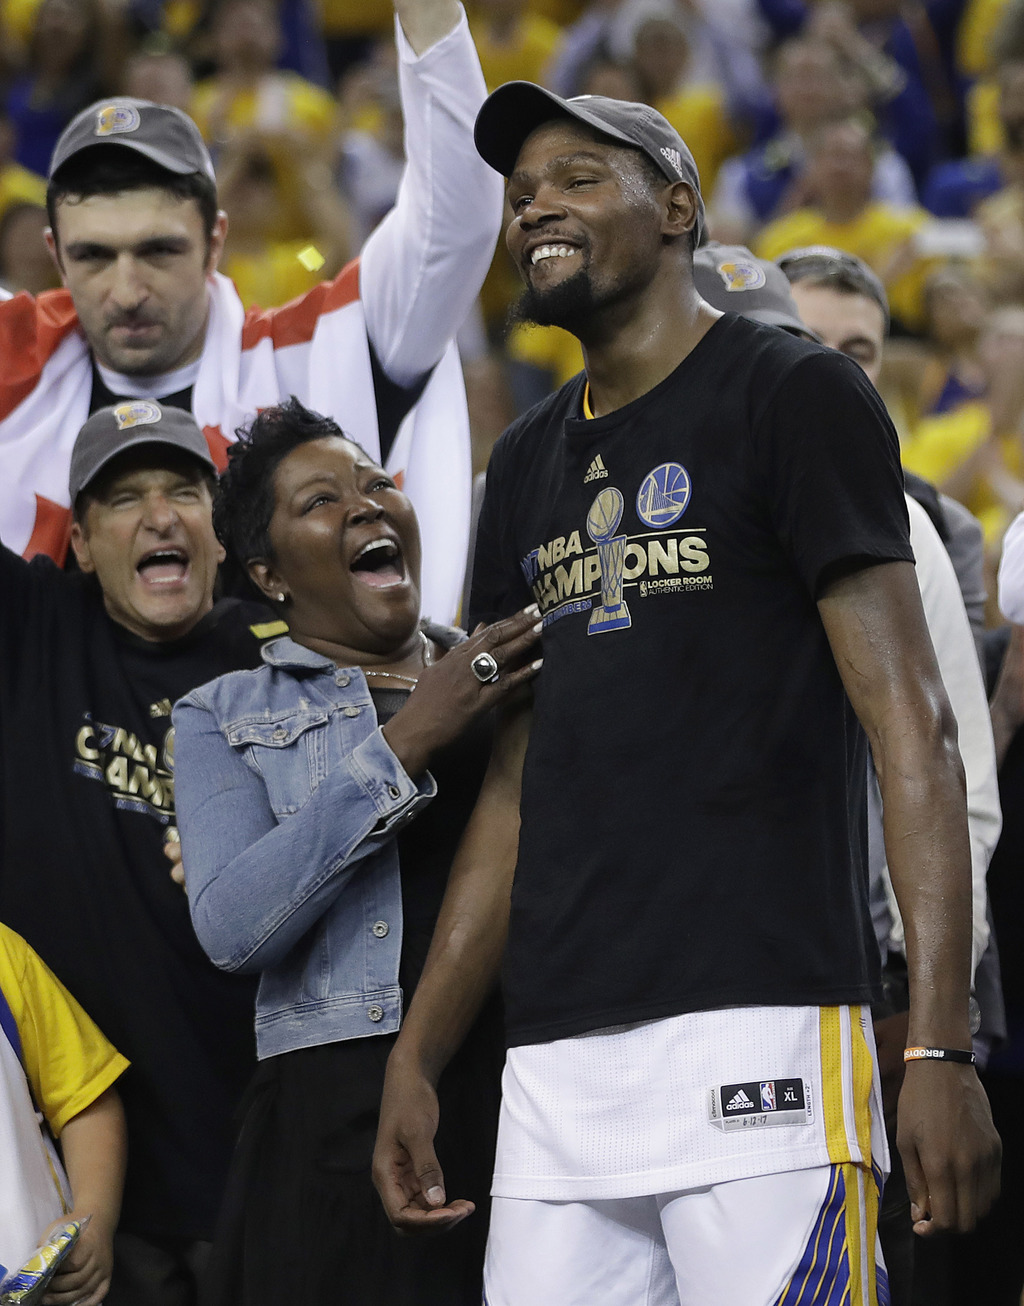 How Fans Have Dehumanized Kevin Durant and Other Athletes for Their Decisions